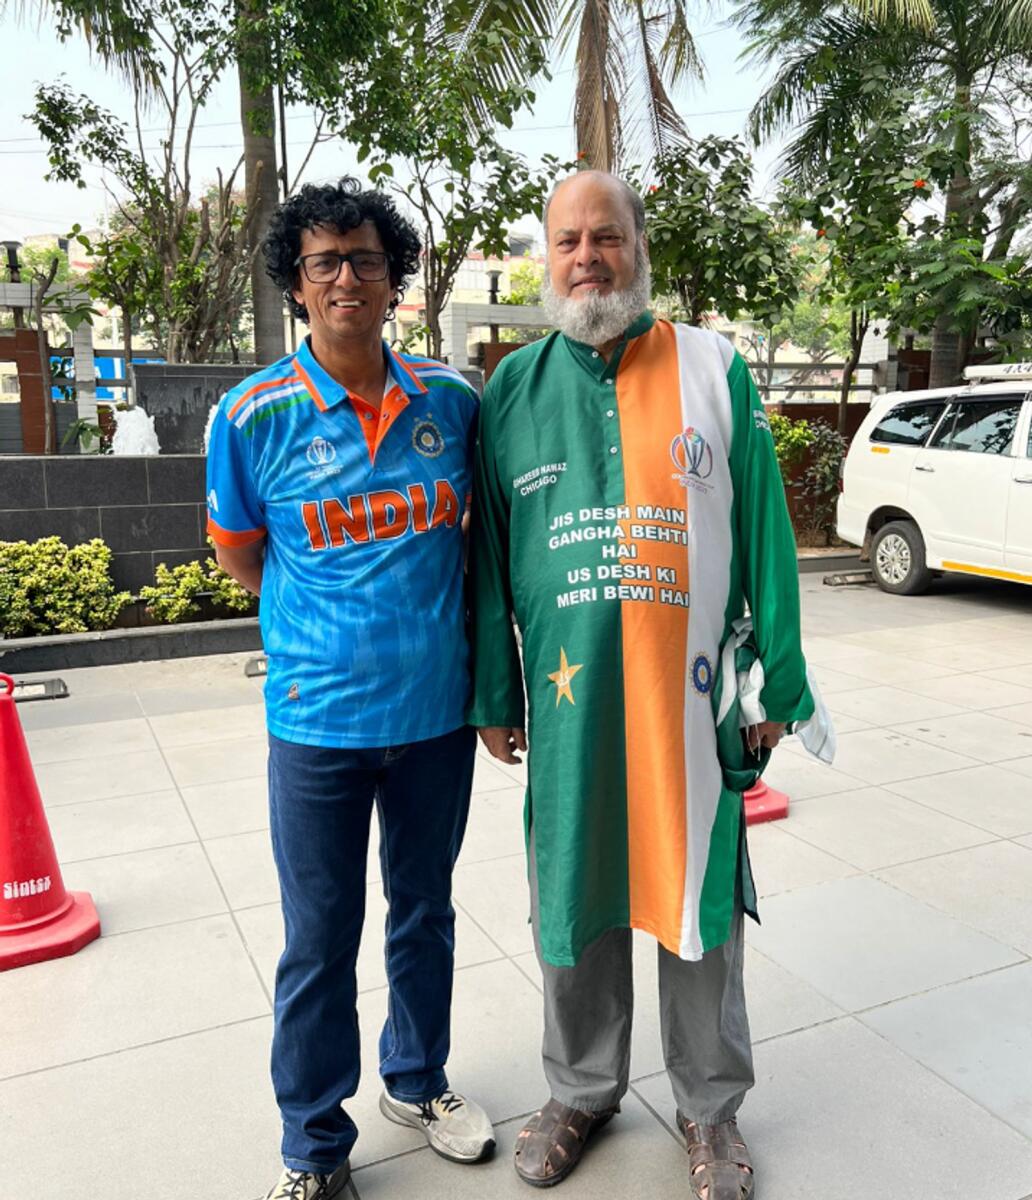 Gopal Jasapara with famous Pakistan cricket fan Mohammad Bashir in Ahmedabad. — Supplied photo